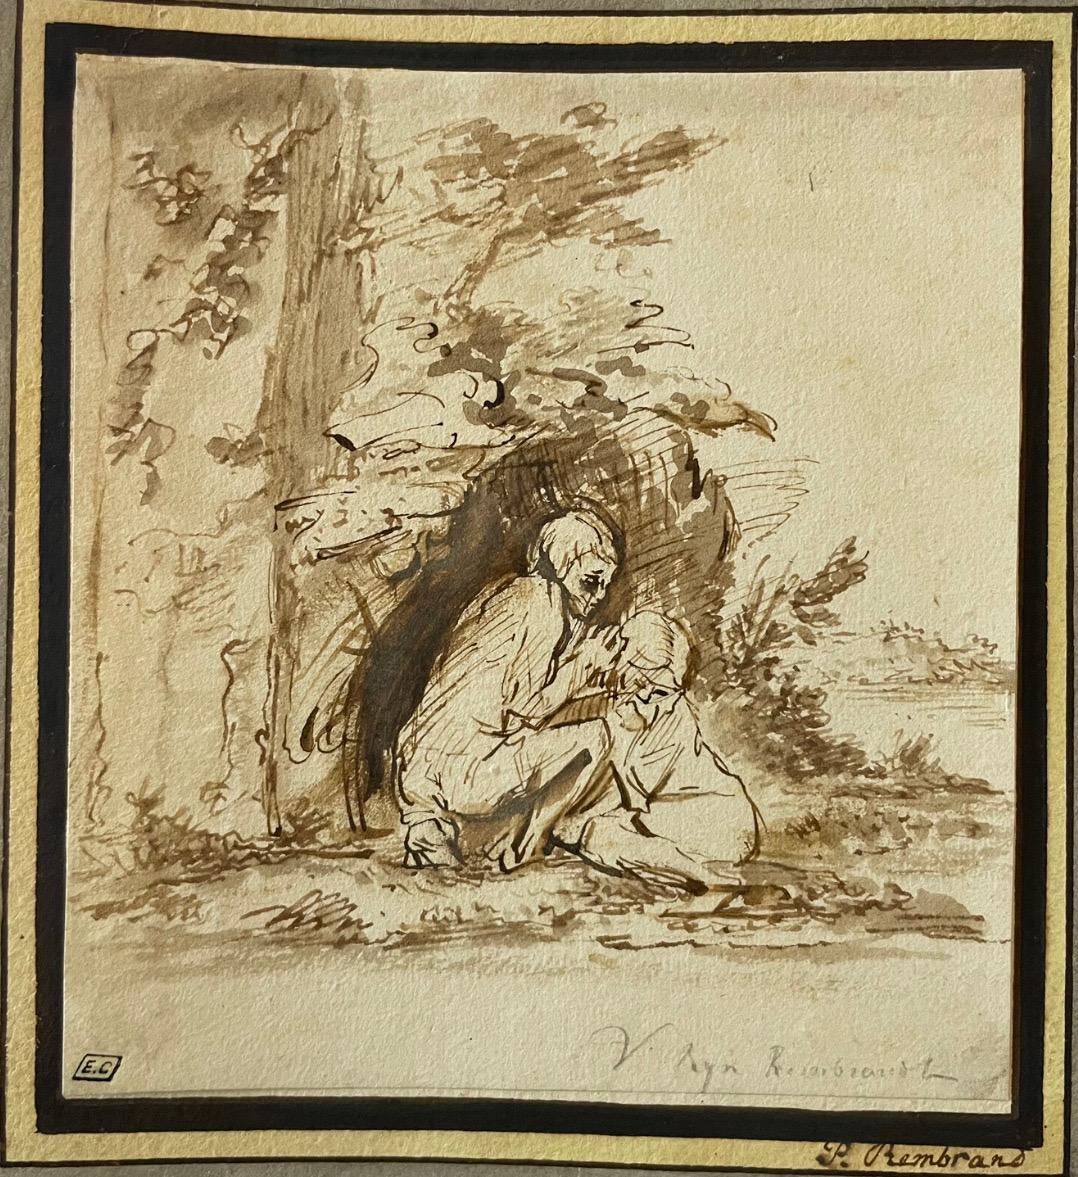 (Circle of) Willem Drost Figurative Painting - 17th C Dutch Old Master Ink & Wash Painting Biblical Figures Rembrandt Pupil